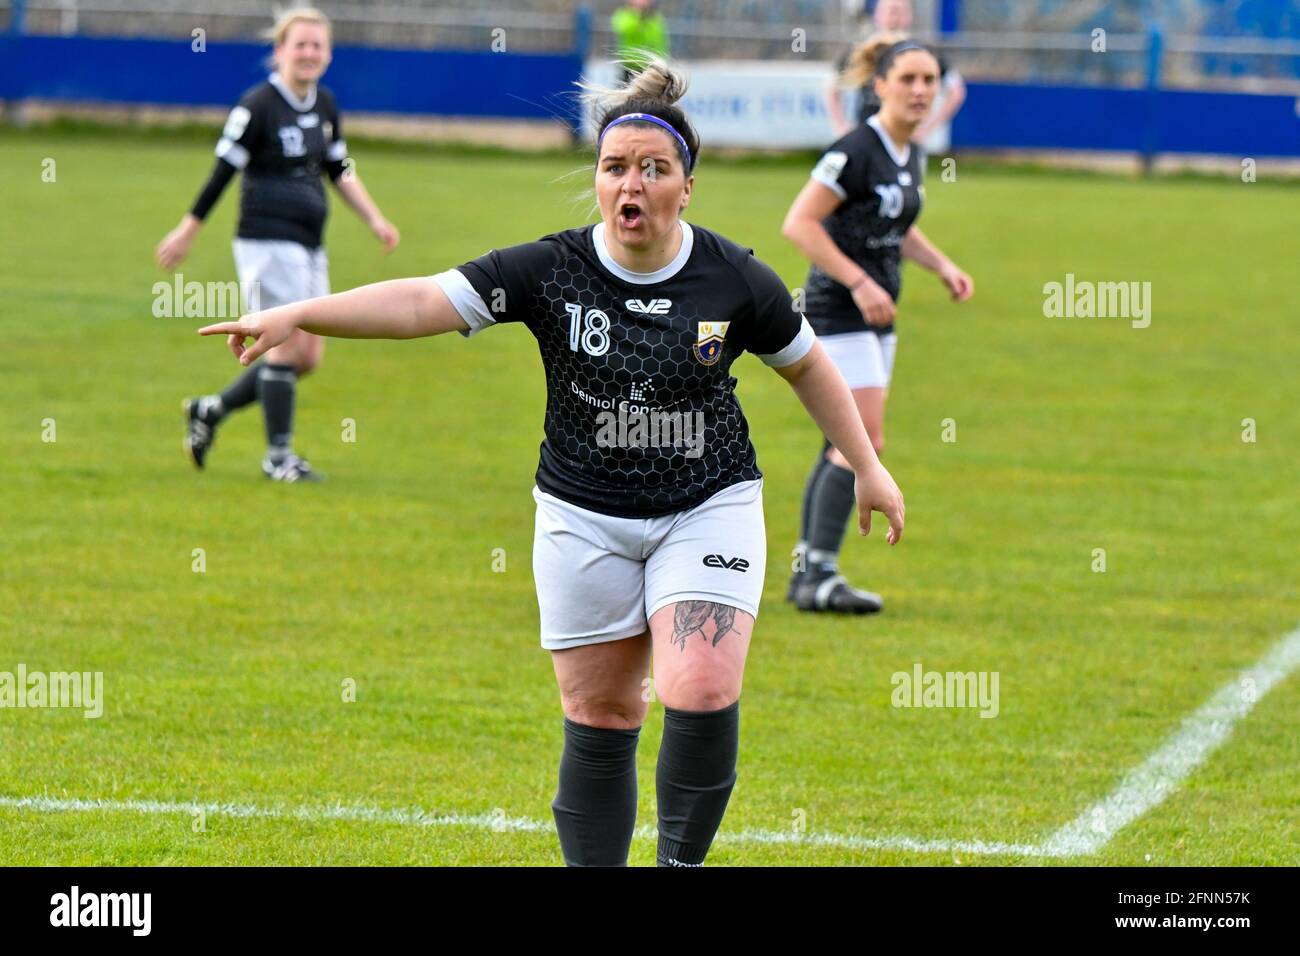 Port Talbot, Wales. 11 April, 2021. Jodie Passmore of Port Talbot Town Ladies shouts instructions to her team mates during the Orchard Welsh Premier Women's League match between Port Talbot Town Ladies and Swansea City Ladies at the Victoria Road Stadium in Port Talbot, Wales, UK on 11, April 2021. Credit: Duncan Thomas/Majestic Media. Stock Photo